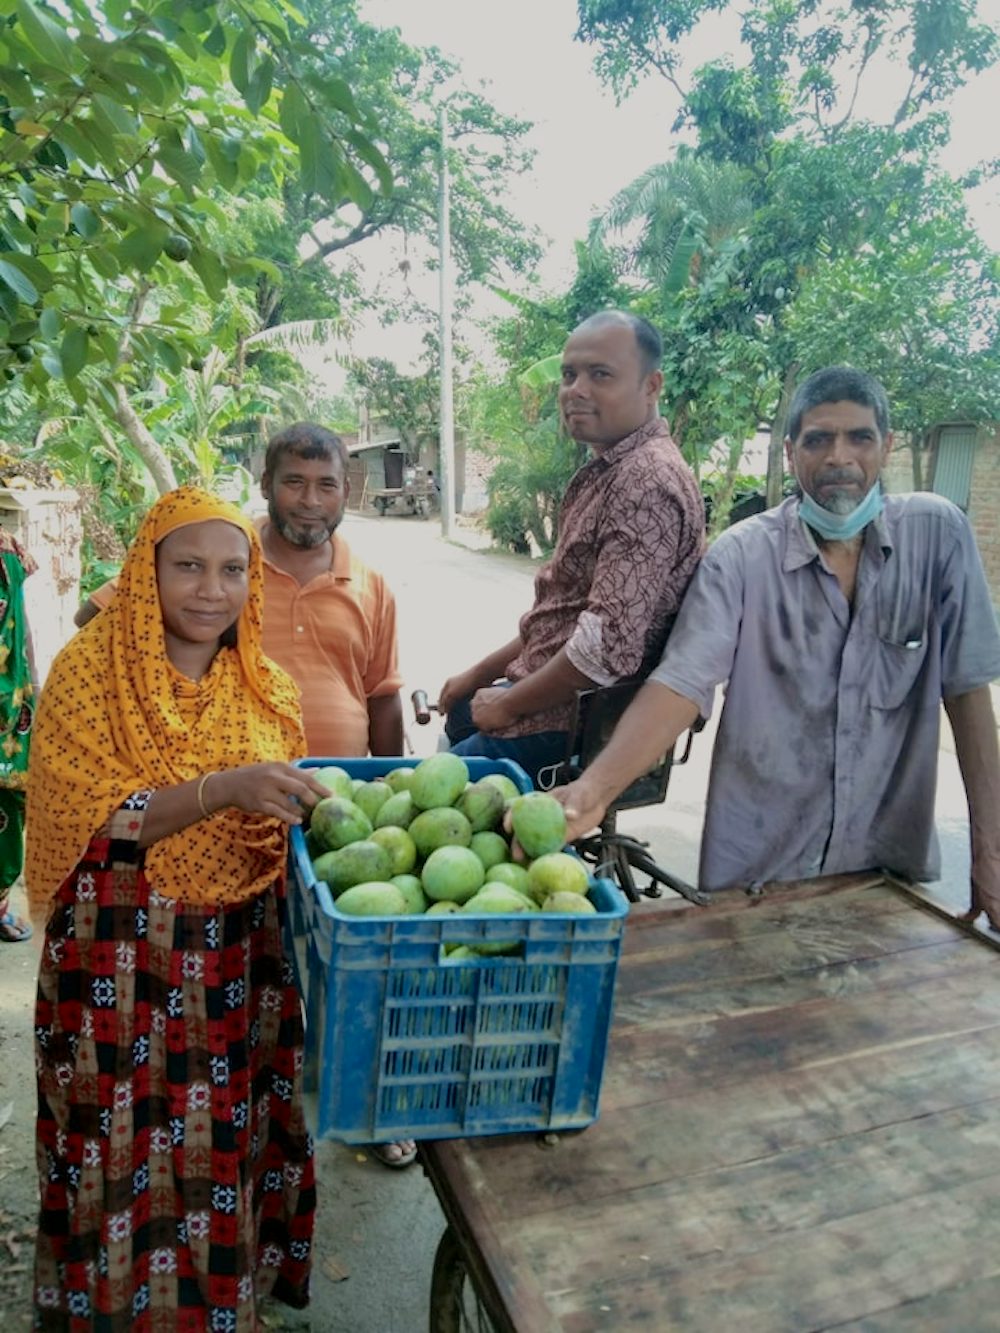 A woman poses for a photo with her mangoes alongside three men who will transport the mangoes.